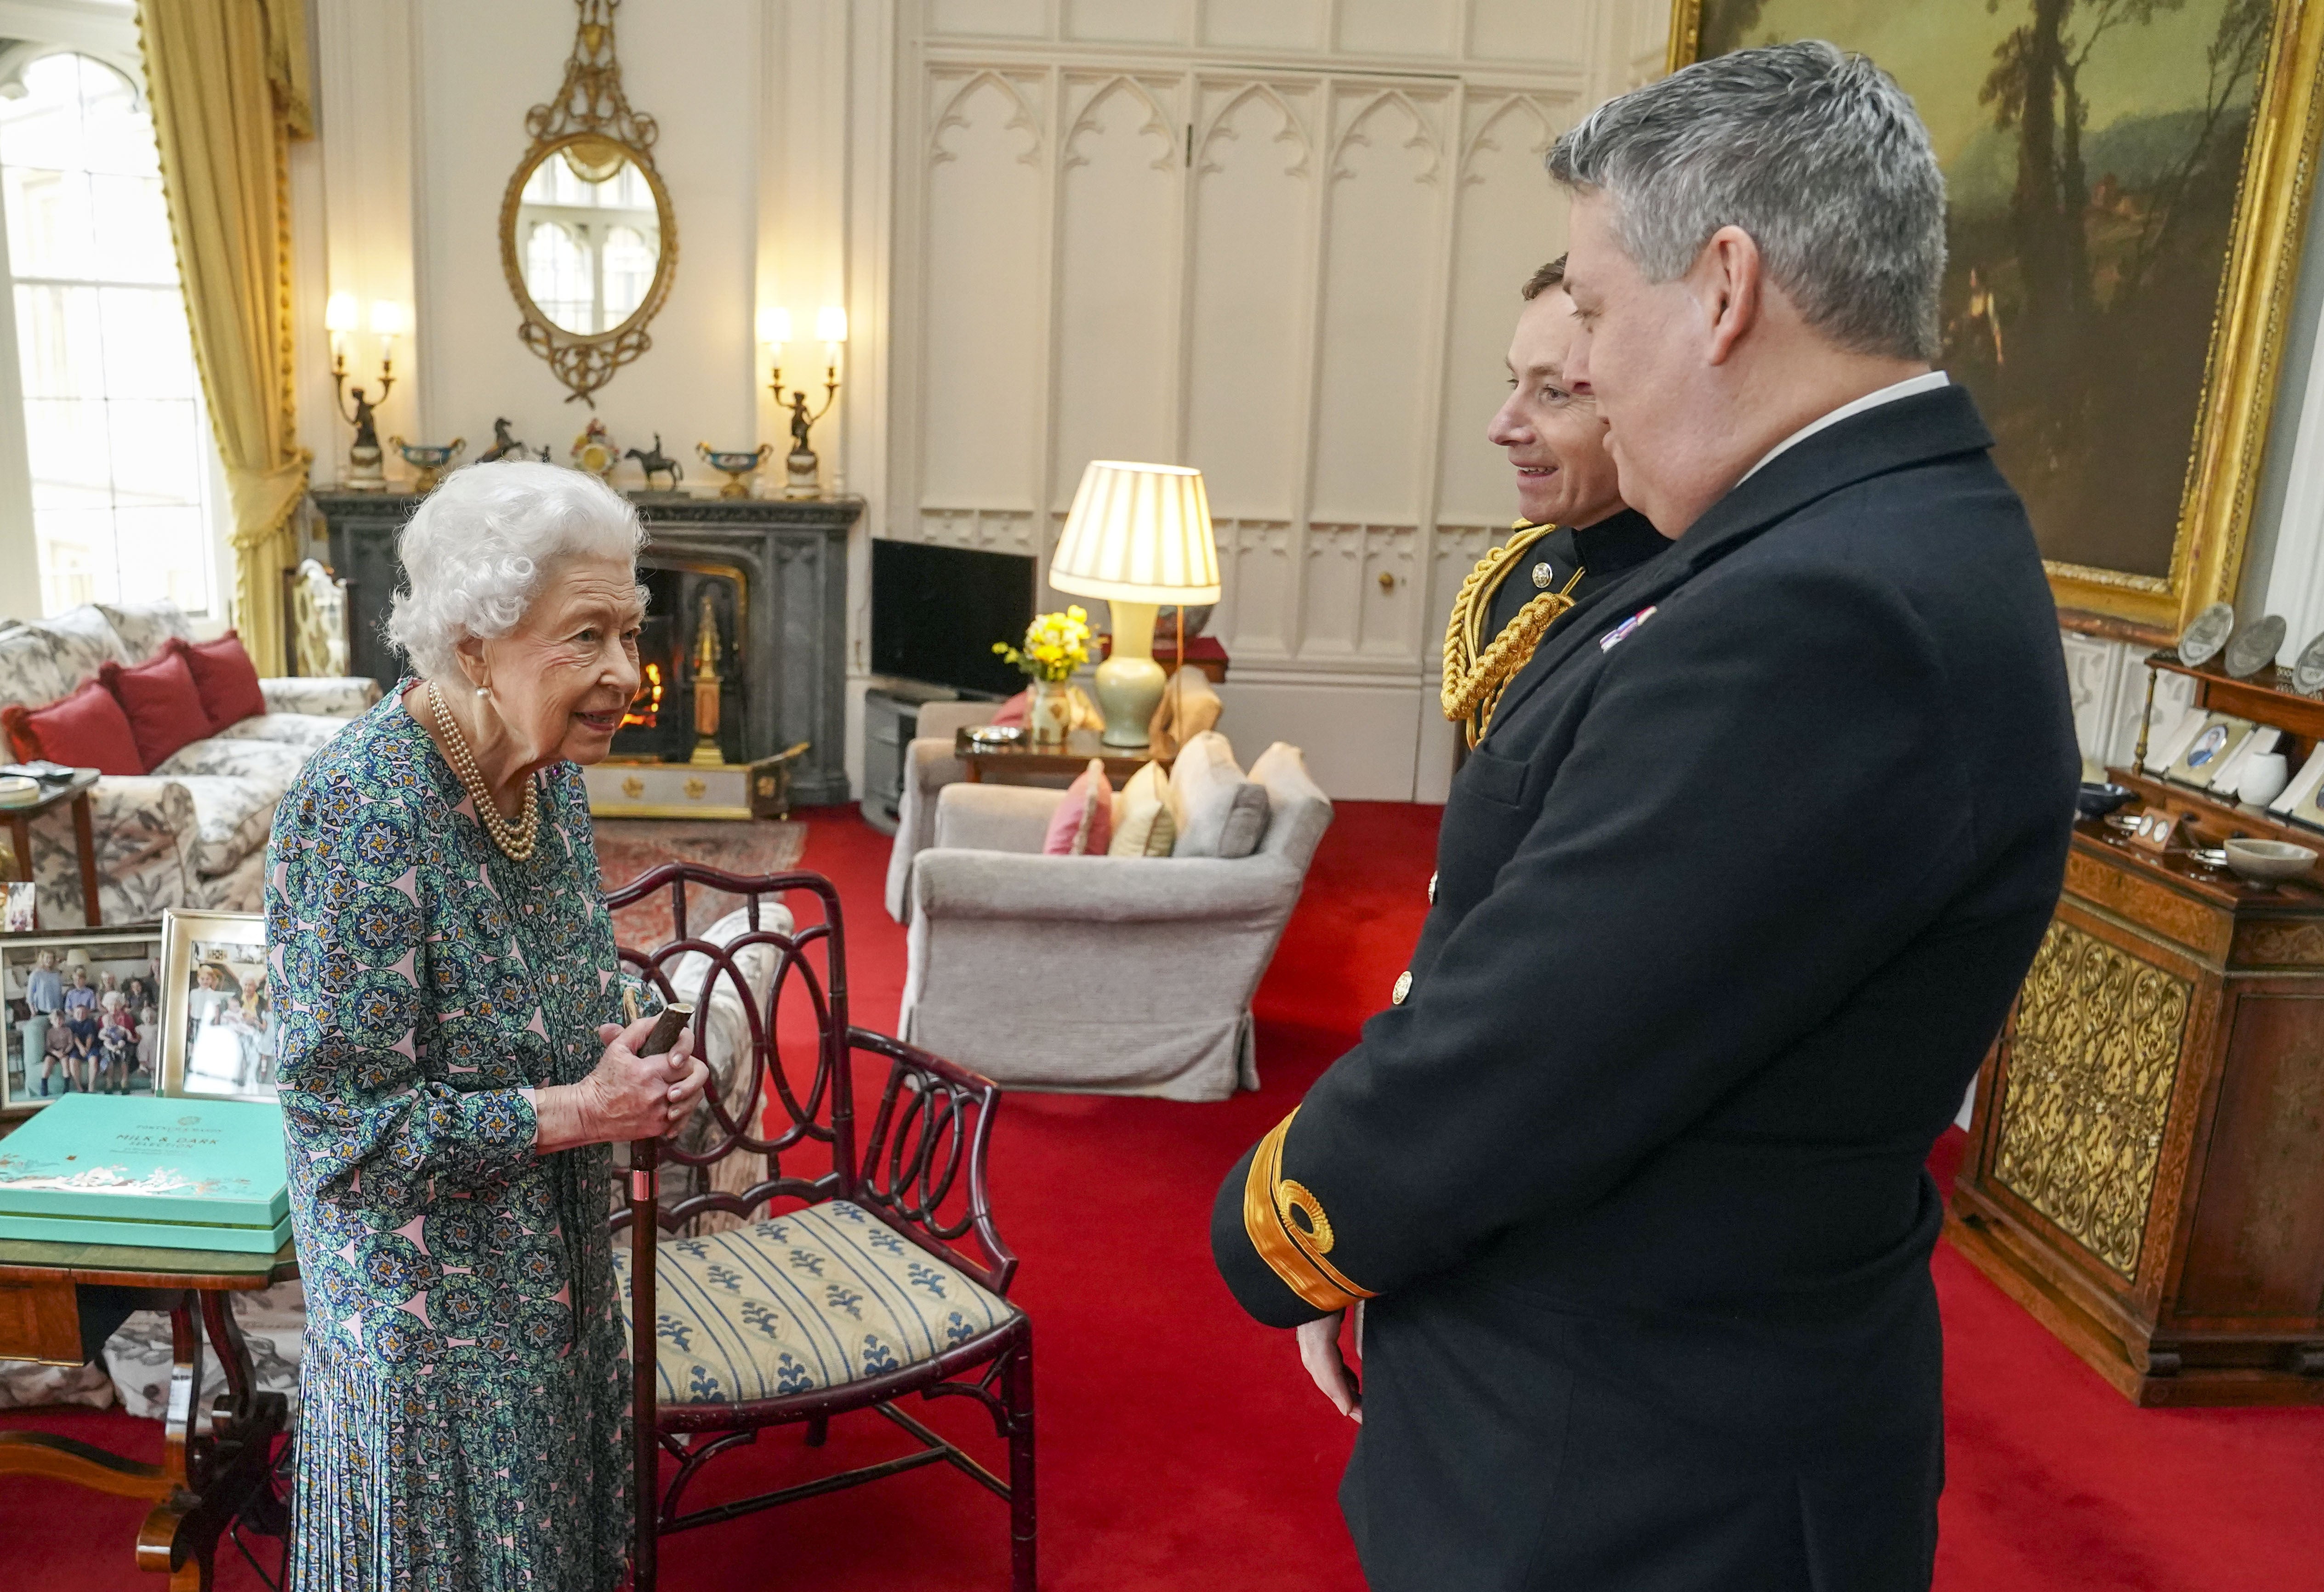 The Queen during an audience last week (Steve Parsons/PA)